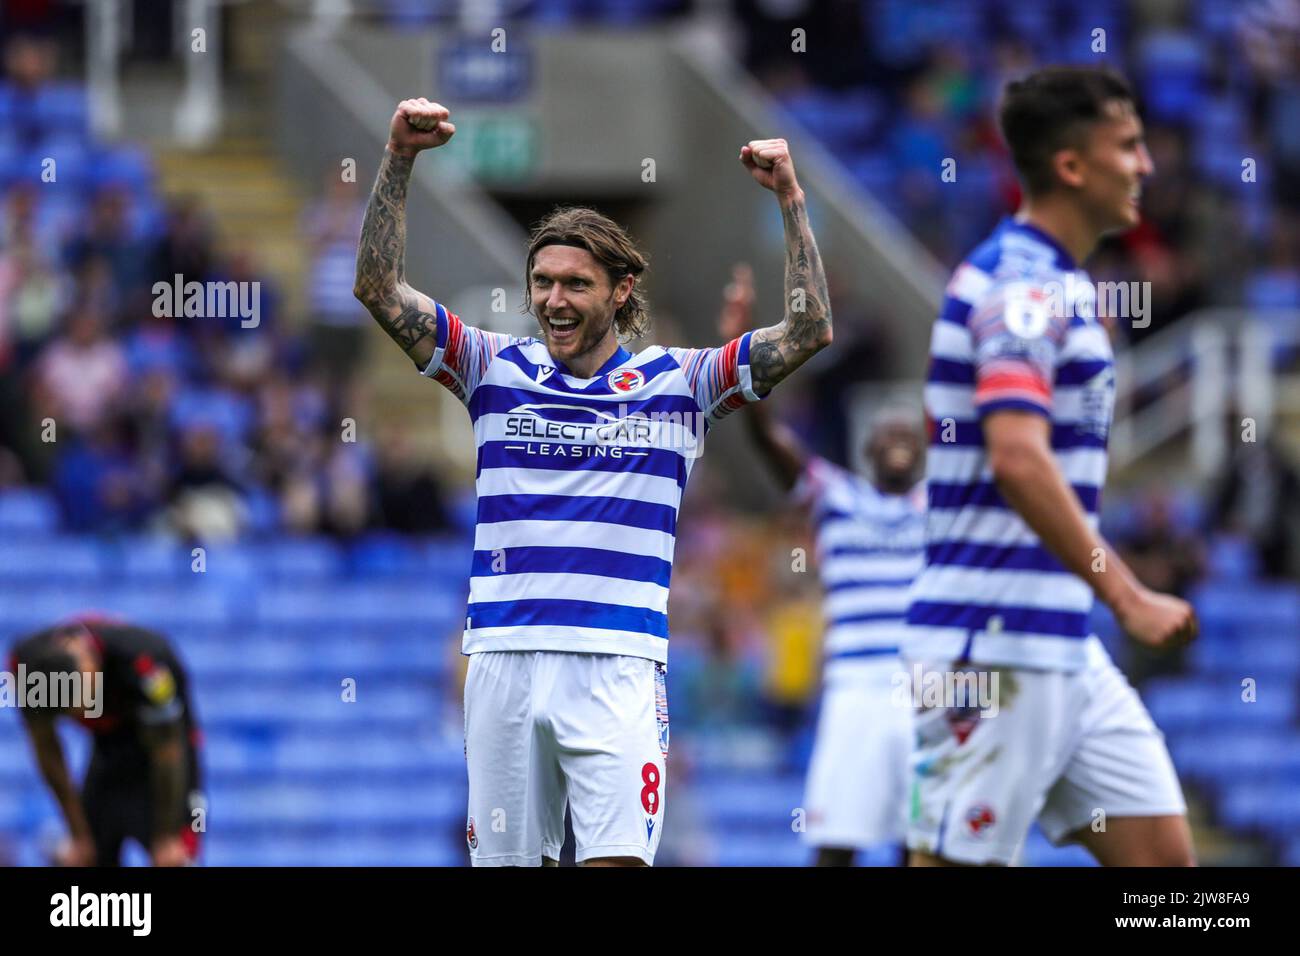 Jeff Hendrick #8 of Reading celebrates after the game during the Sky Bet Championship match Reading vs Stoke City at Select Car Leasing Stadium, Reading, United Kingdom, 4th September 2022  (Photo by Ben Whitley/News Images) in Reading, United Kingdom on 9/3/2022. (Photo by Ben Whitley/News Images/Sipa USA) Stock Photo